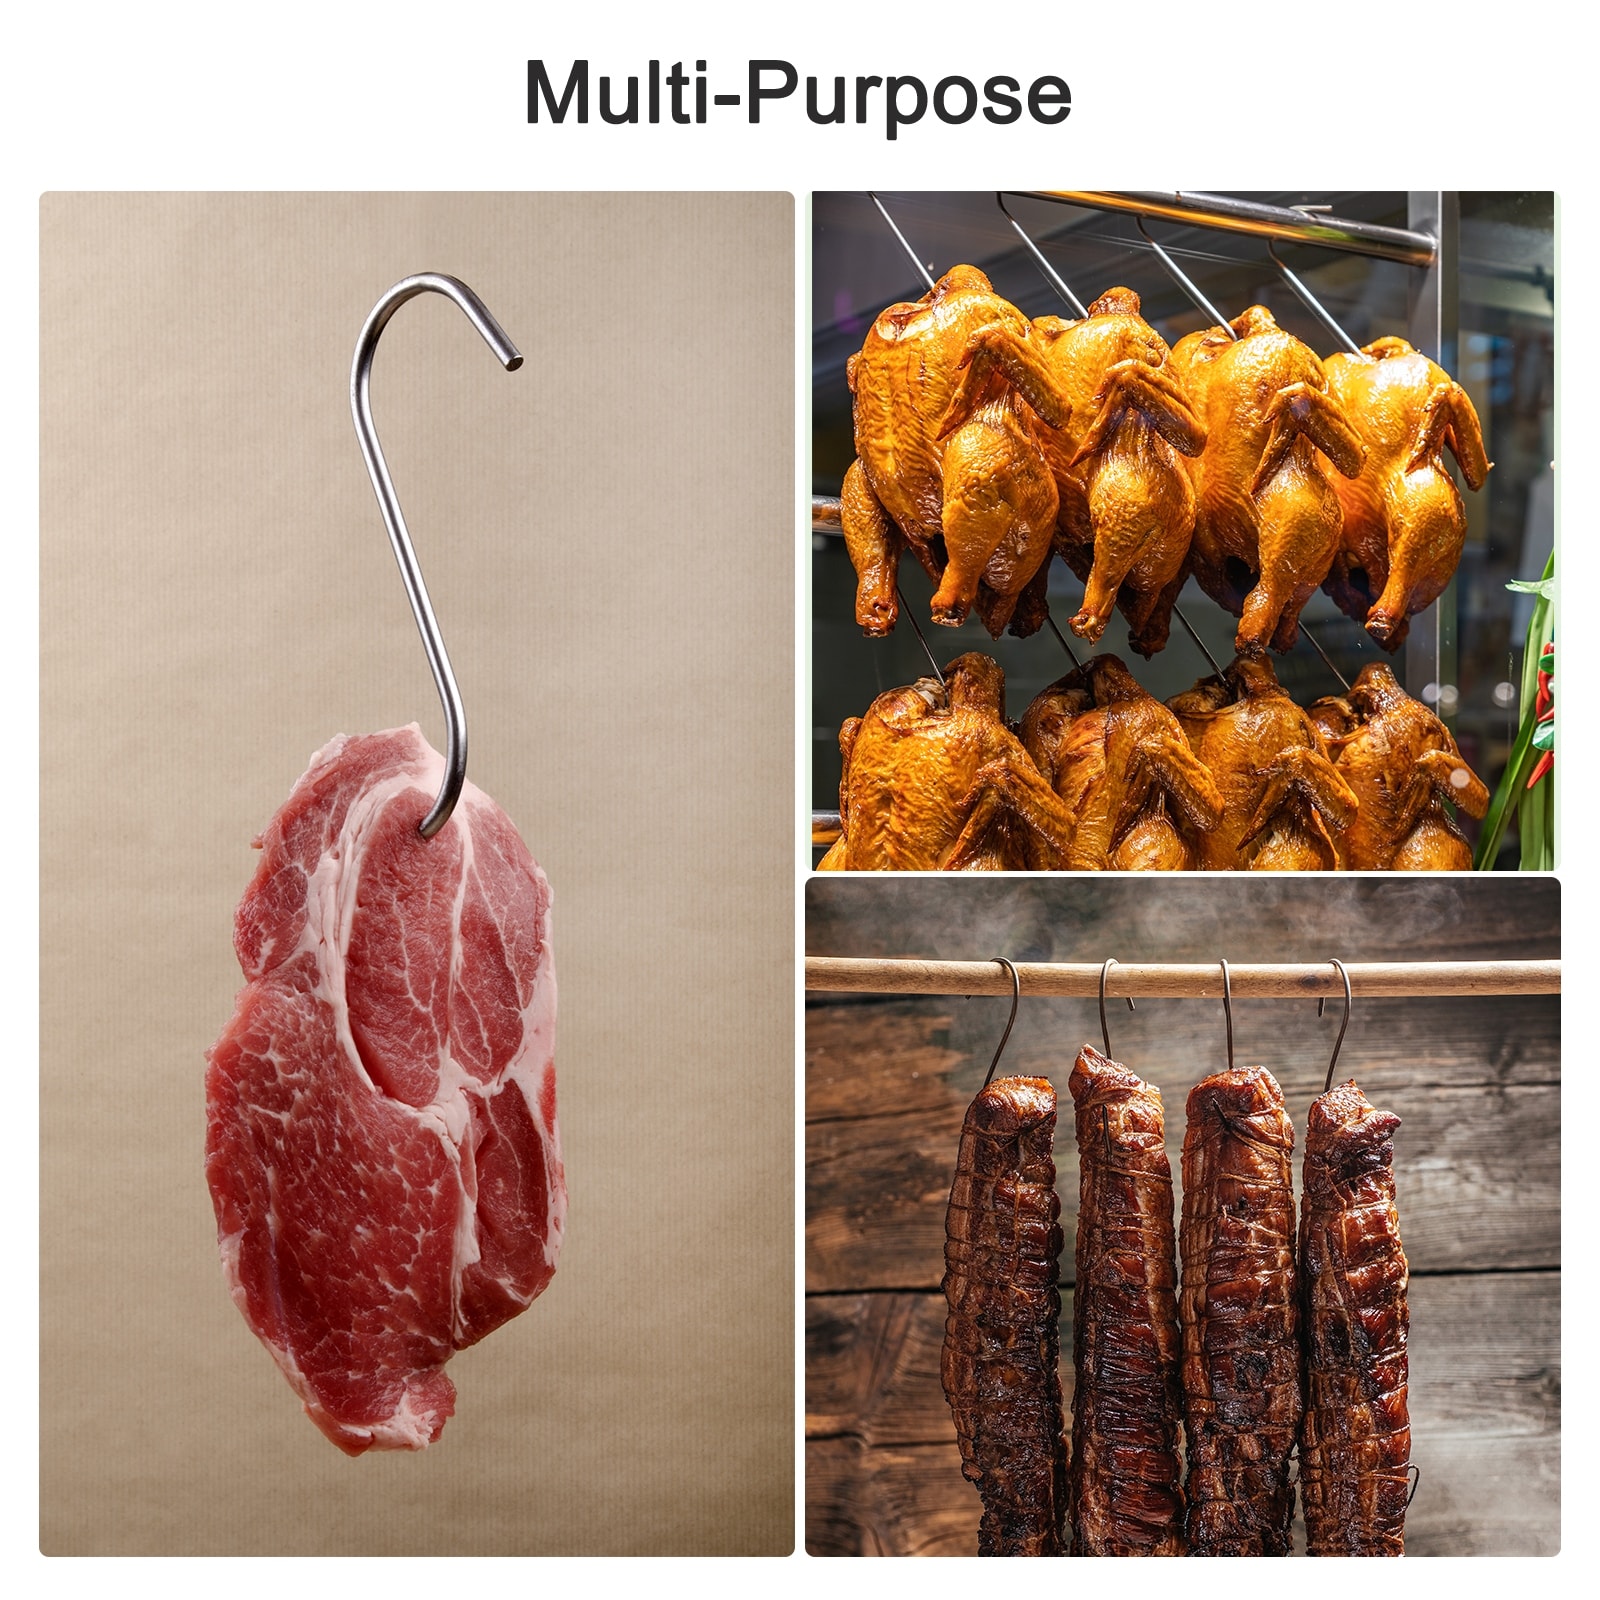 https://ak1.ostkcdn.com/images/products/is/images/direct/738b125185d0e27b98390a39b8e0a48a97f49311/5.91%22-Meat-Hooks%2C-0.24%22-Thick-Stainless-Steel-S-Hook-Meat-Processing-1Pcs.jpg